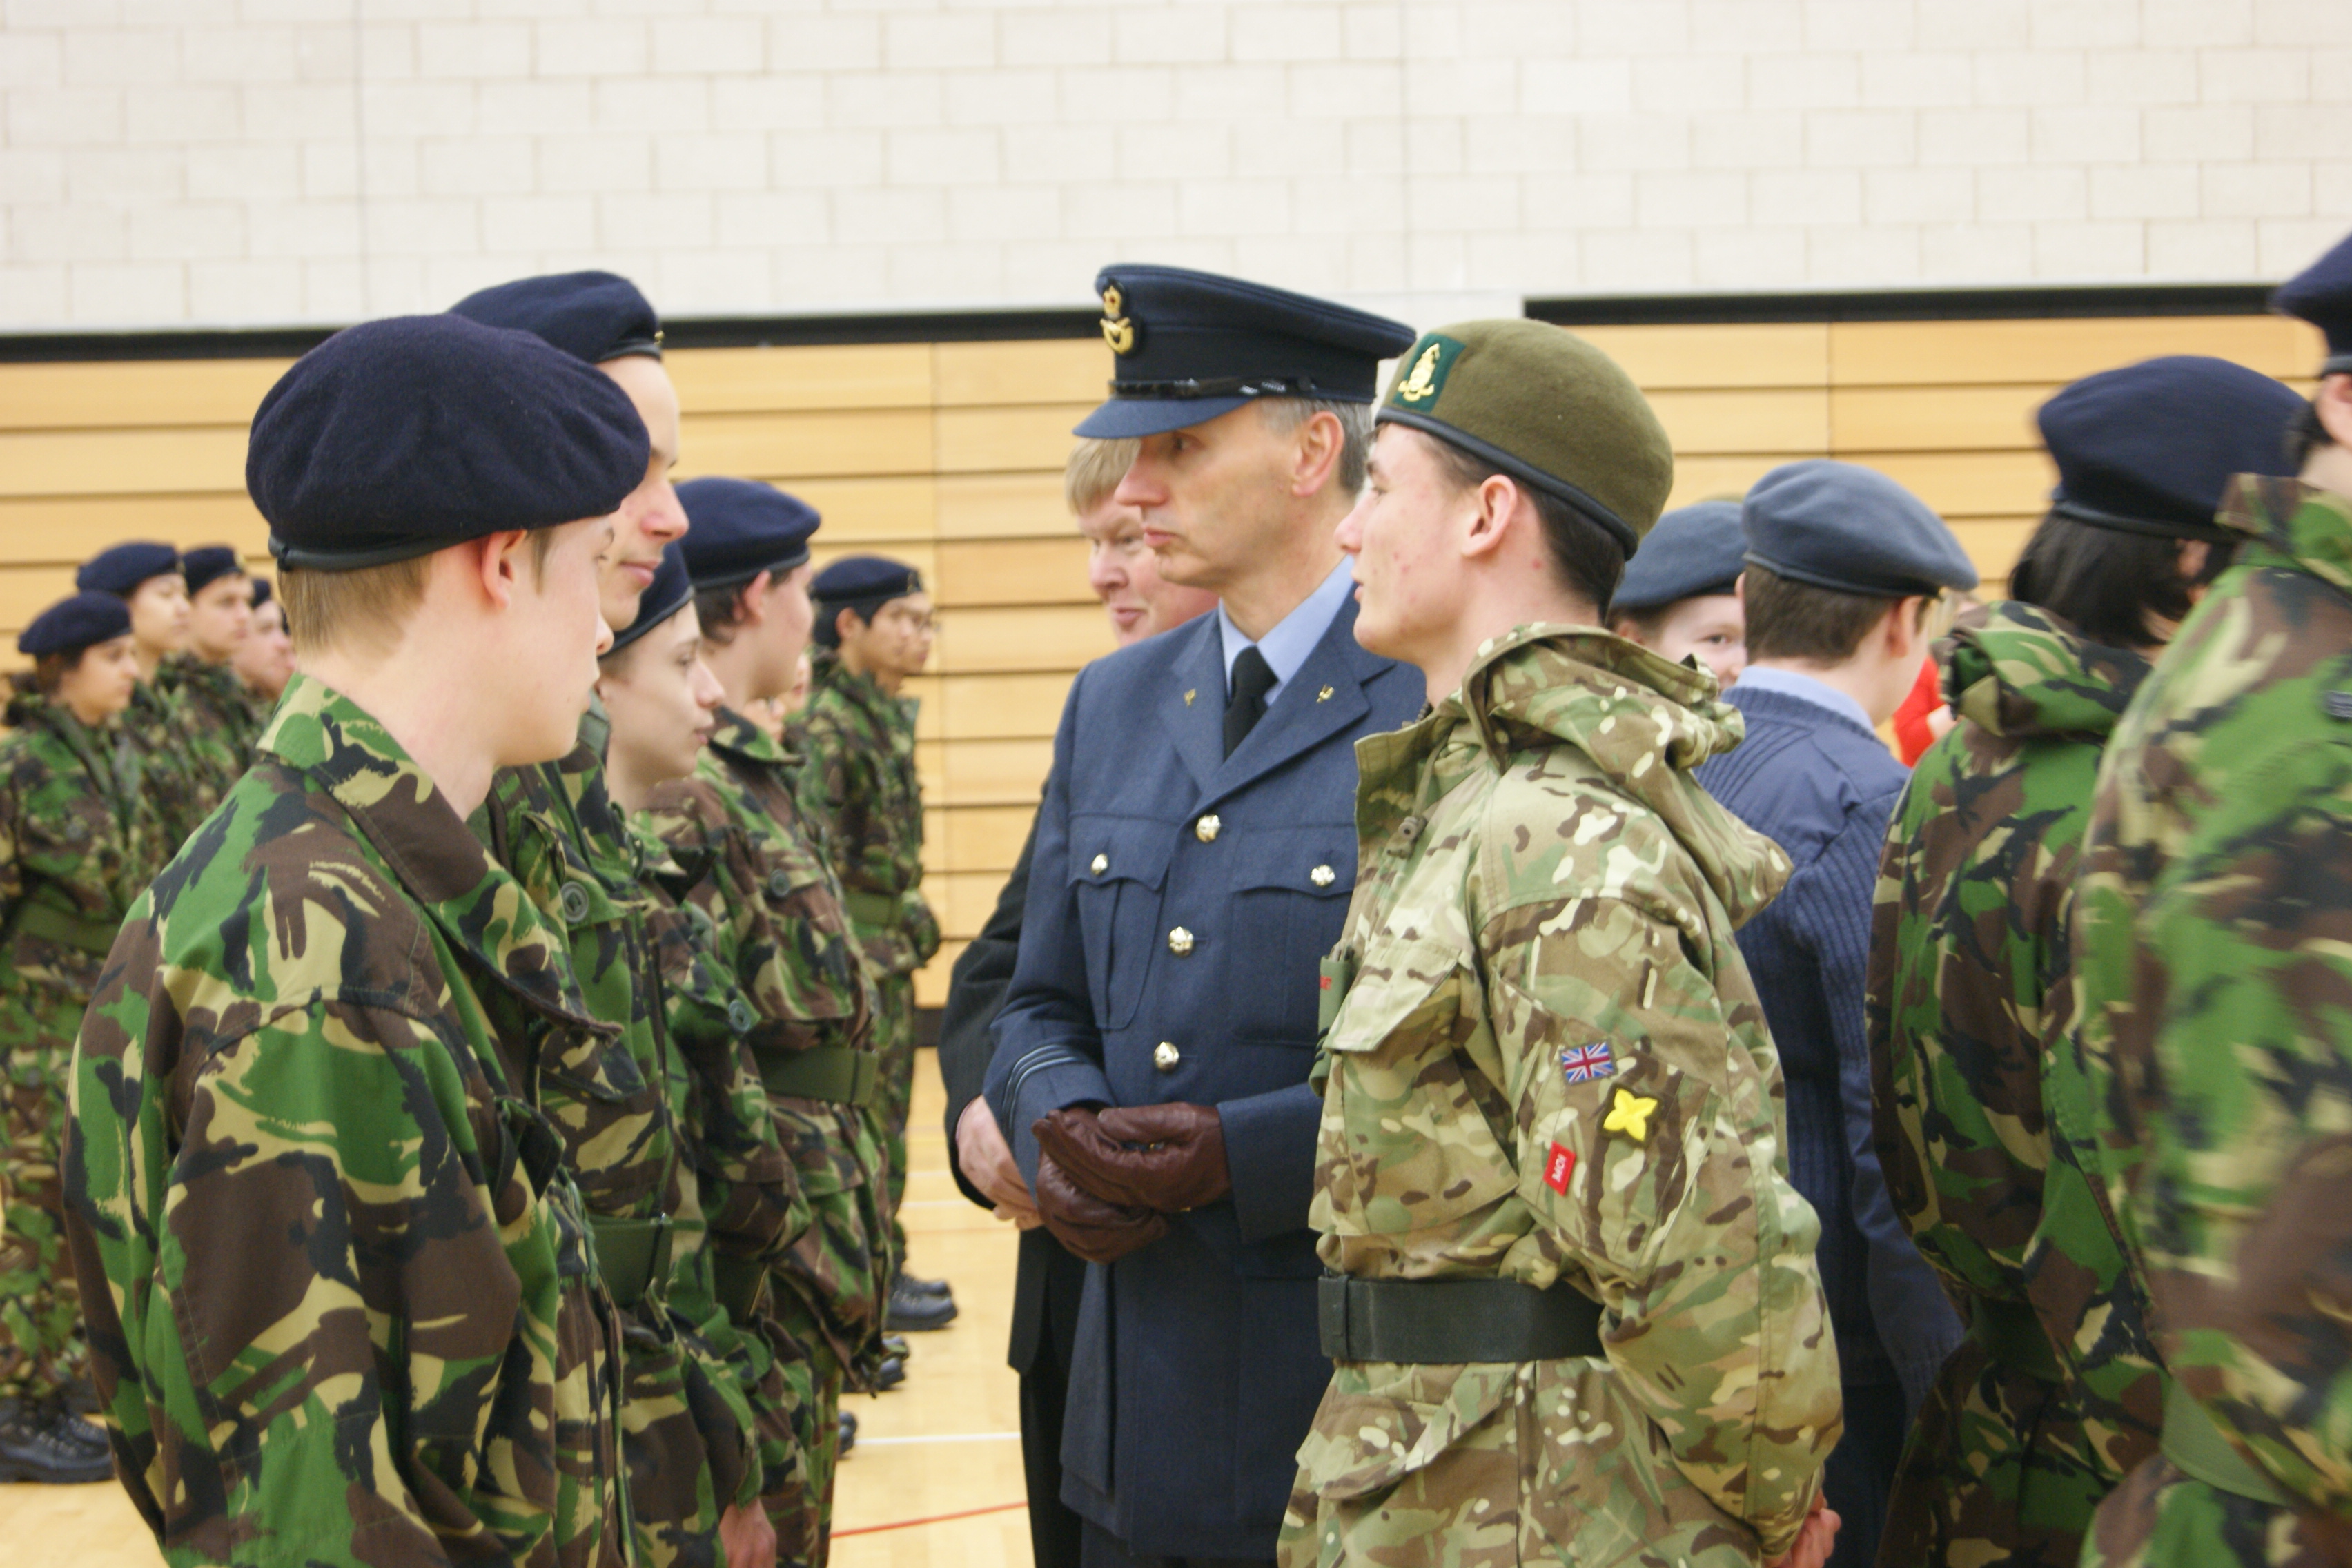 CCF Internal Review, March 2014